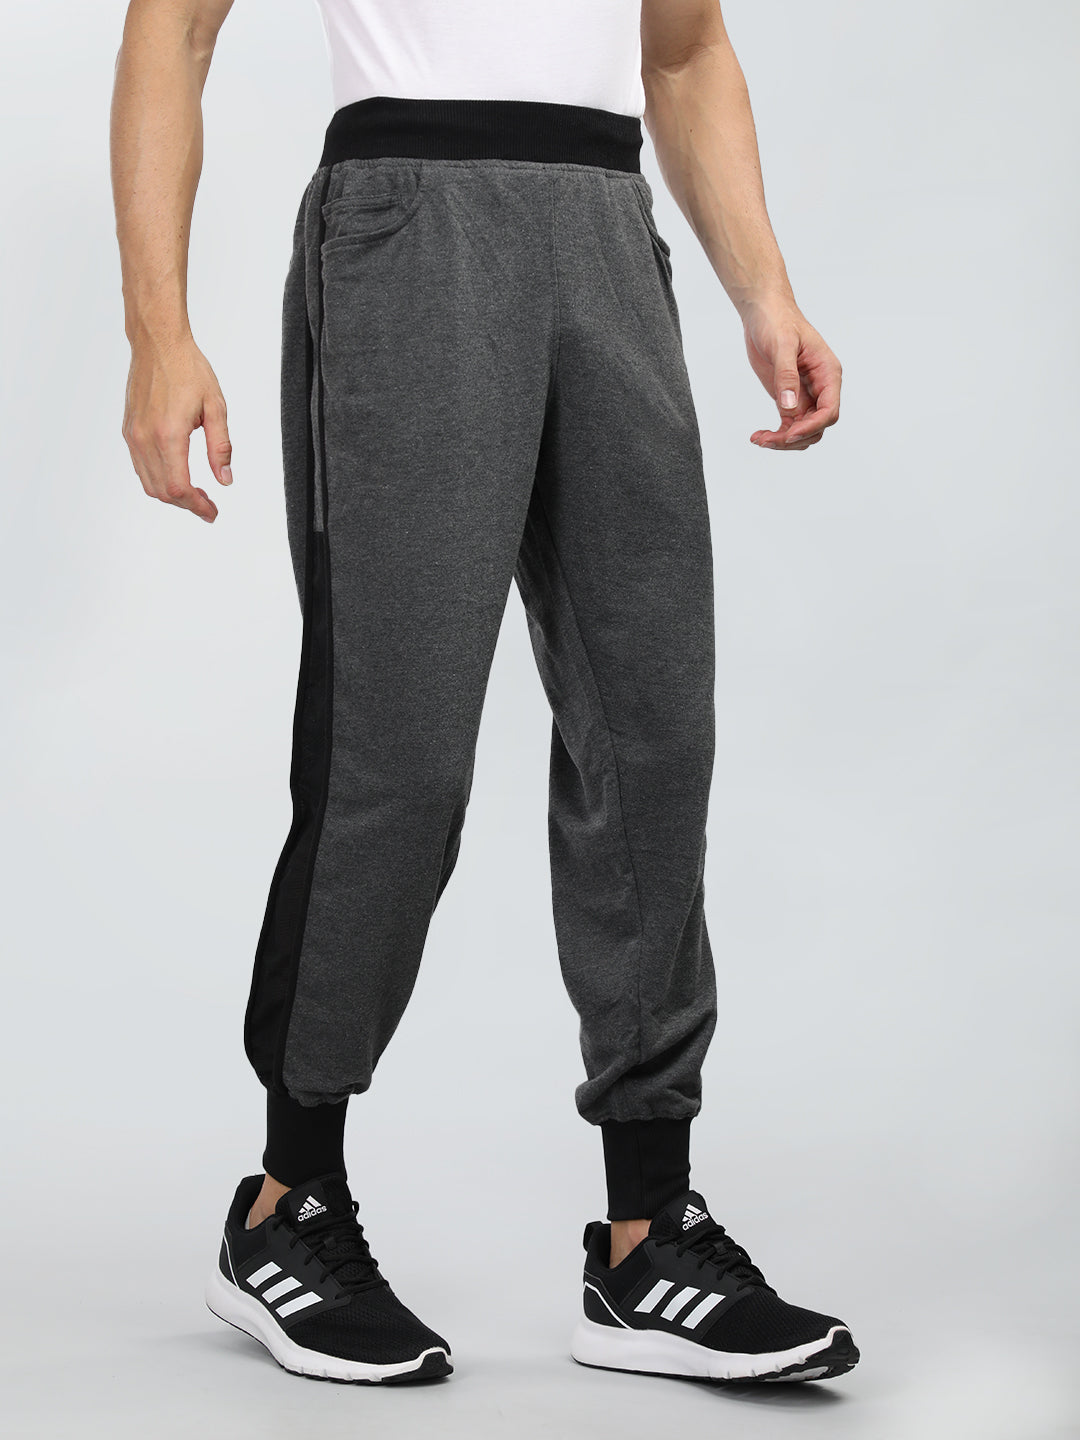 CHKOKKO Men Casual Track Pant Workout Lower with Pocket